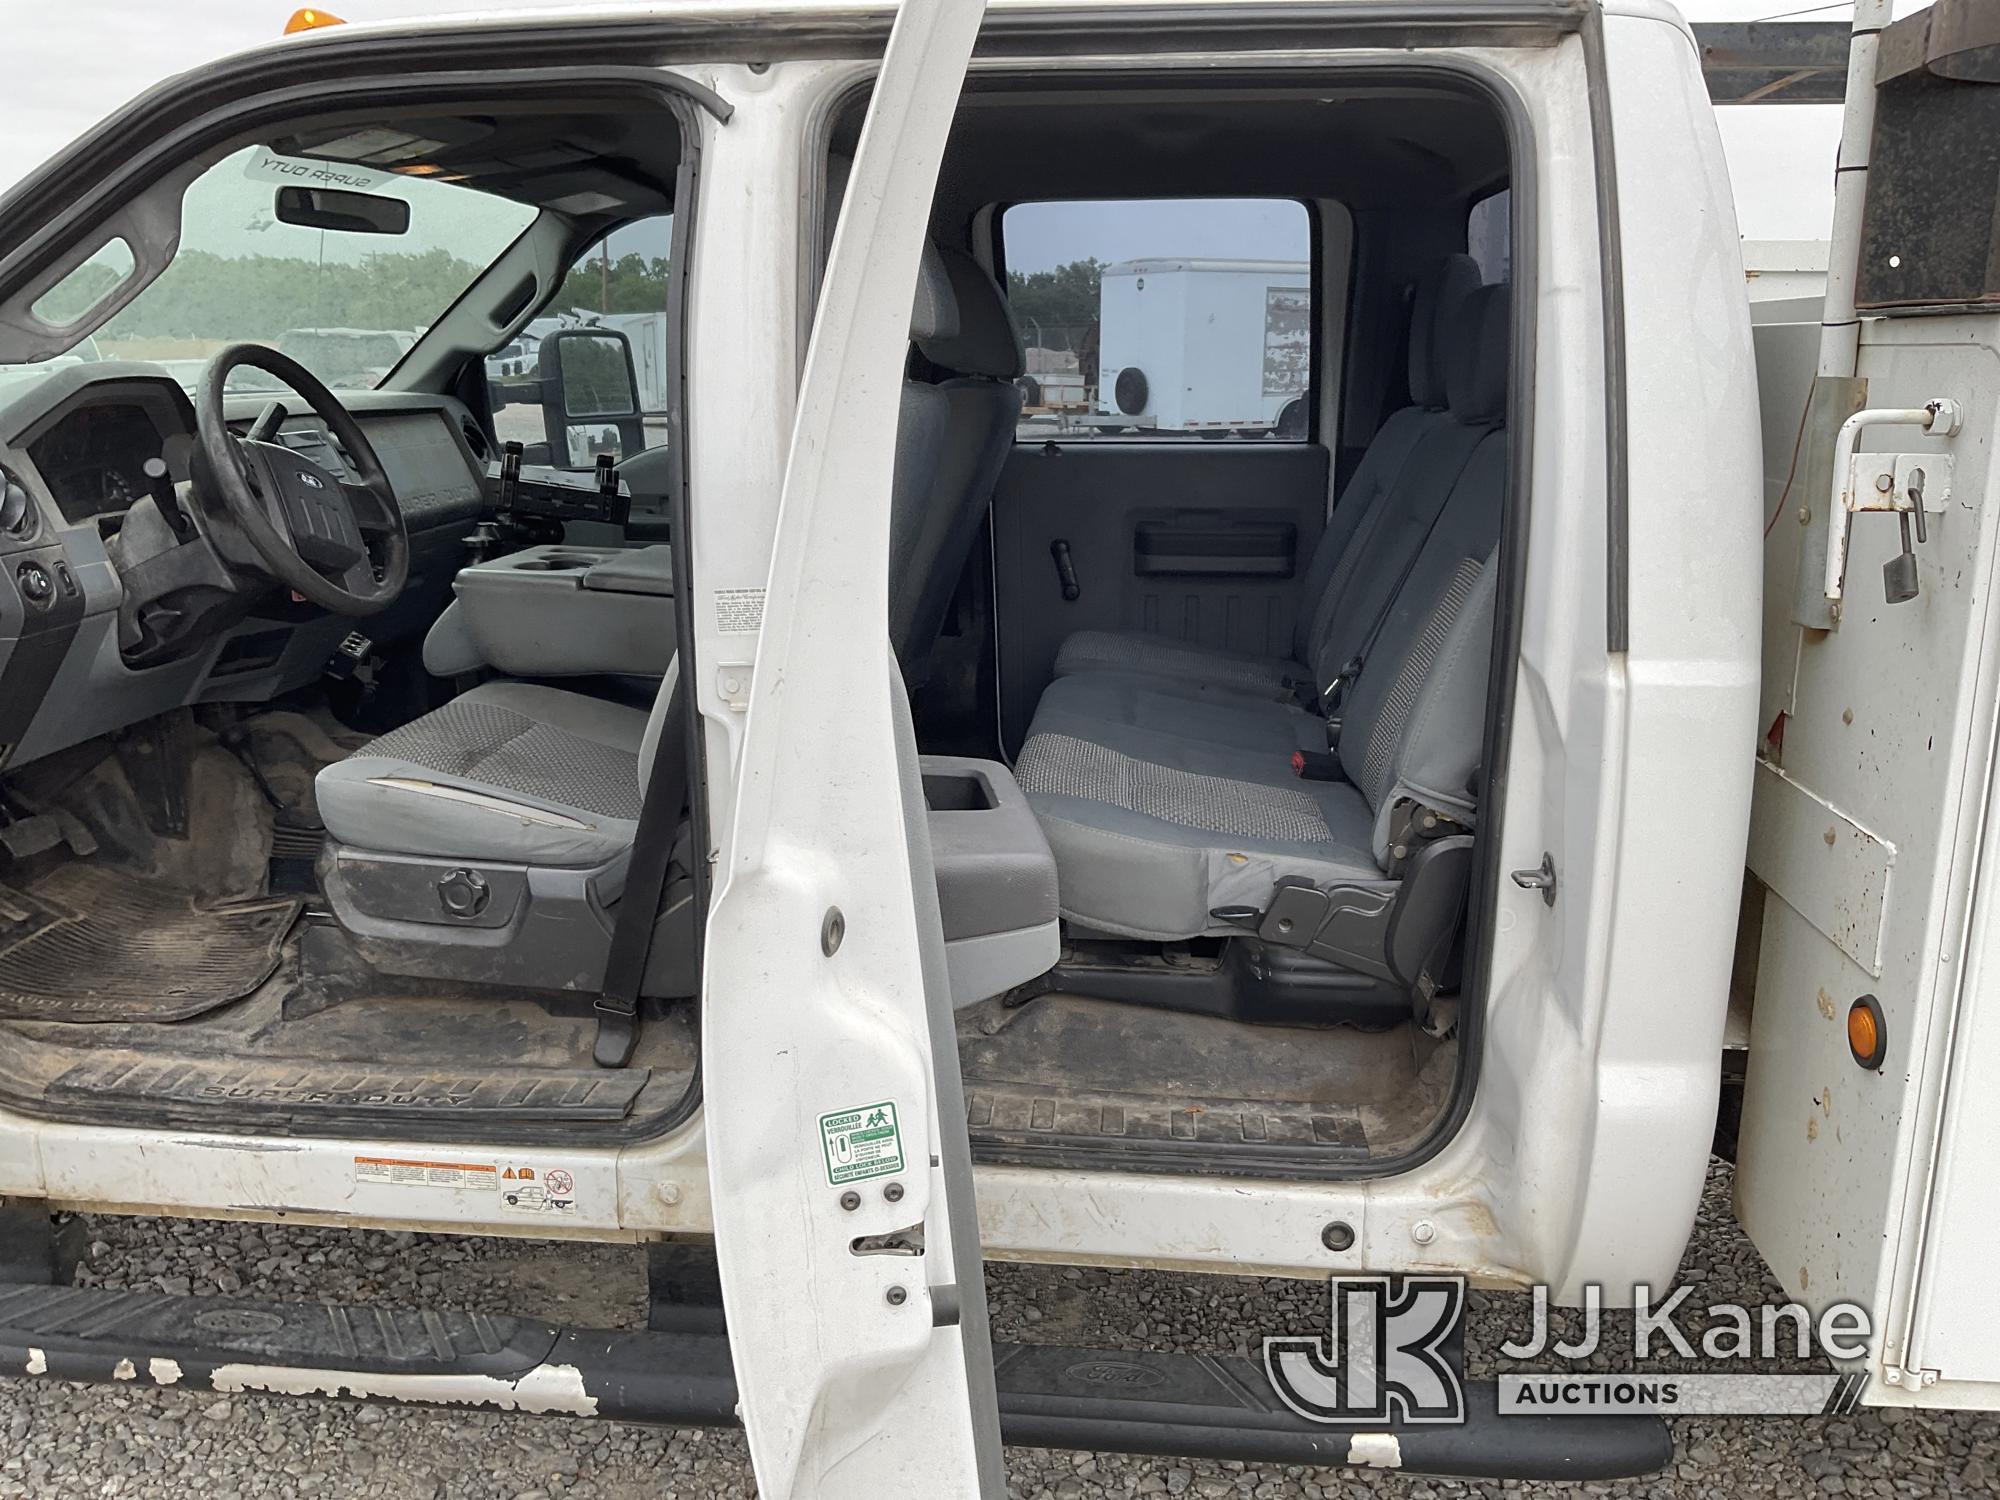 (Johnson City, TX) 2012 Ford F550 4x4 Crew-Cab Service Truck Runs & Moves) (Check Engine Light Is On